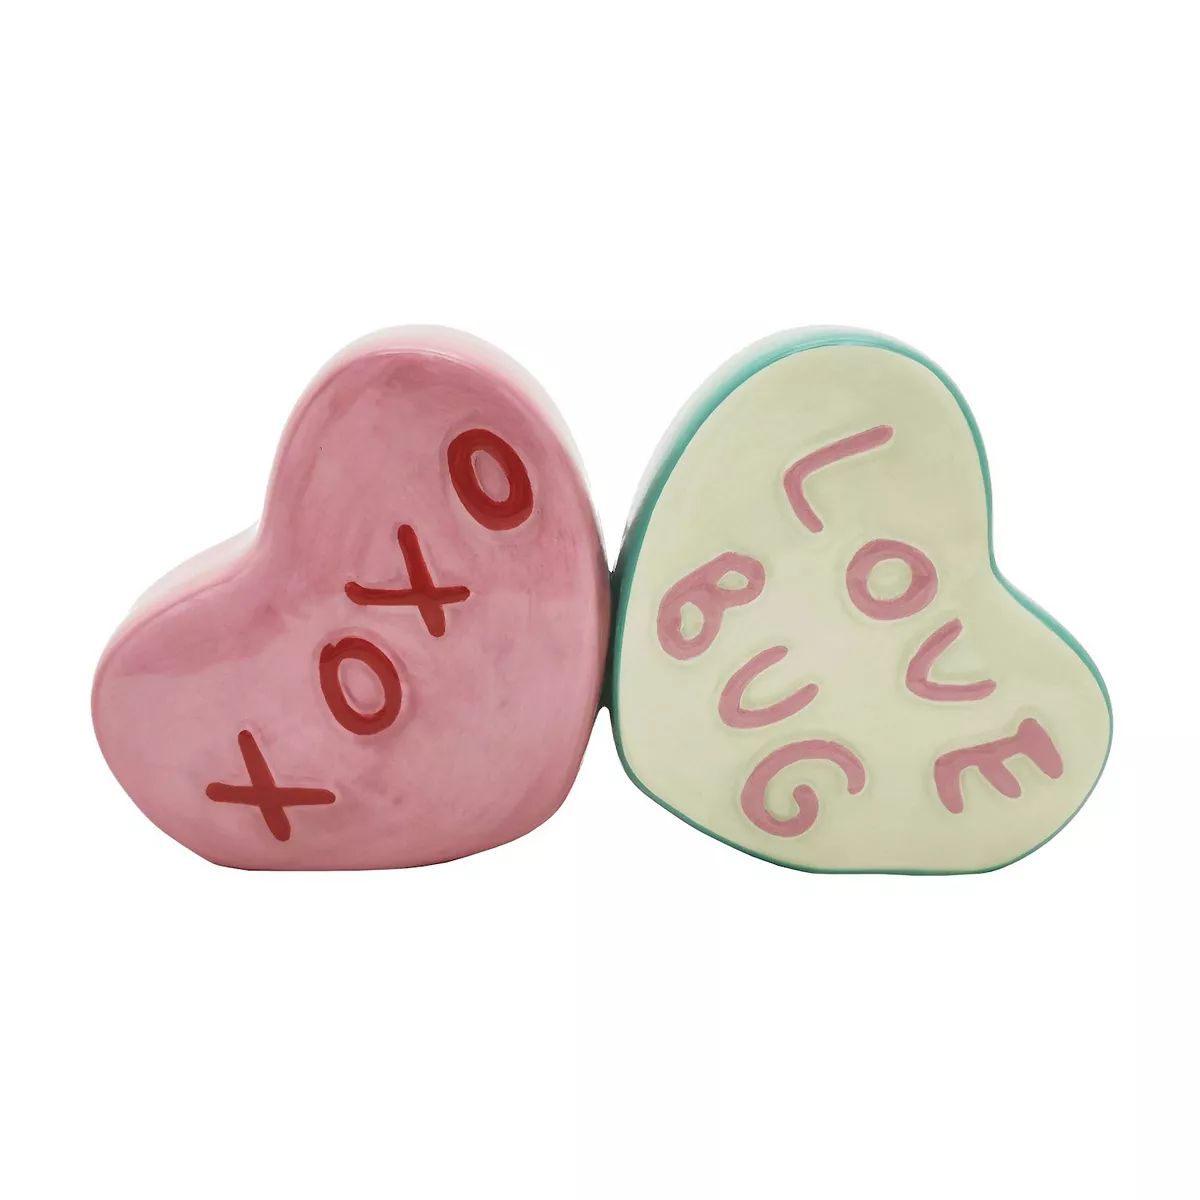 Celebrate Together™ Valentine's Day Ceramic Heart Sitbaout | Kohl's